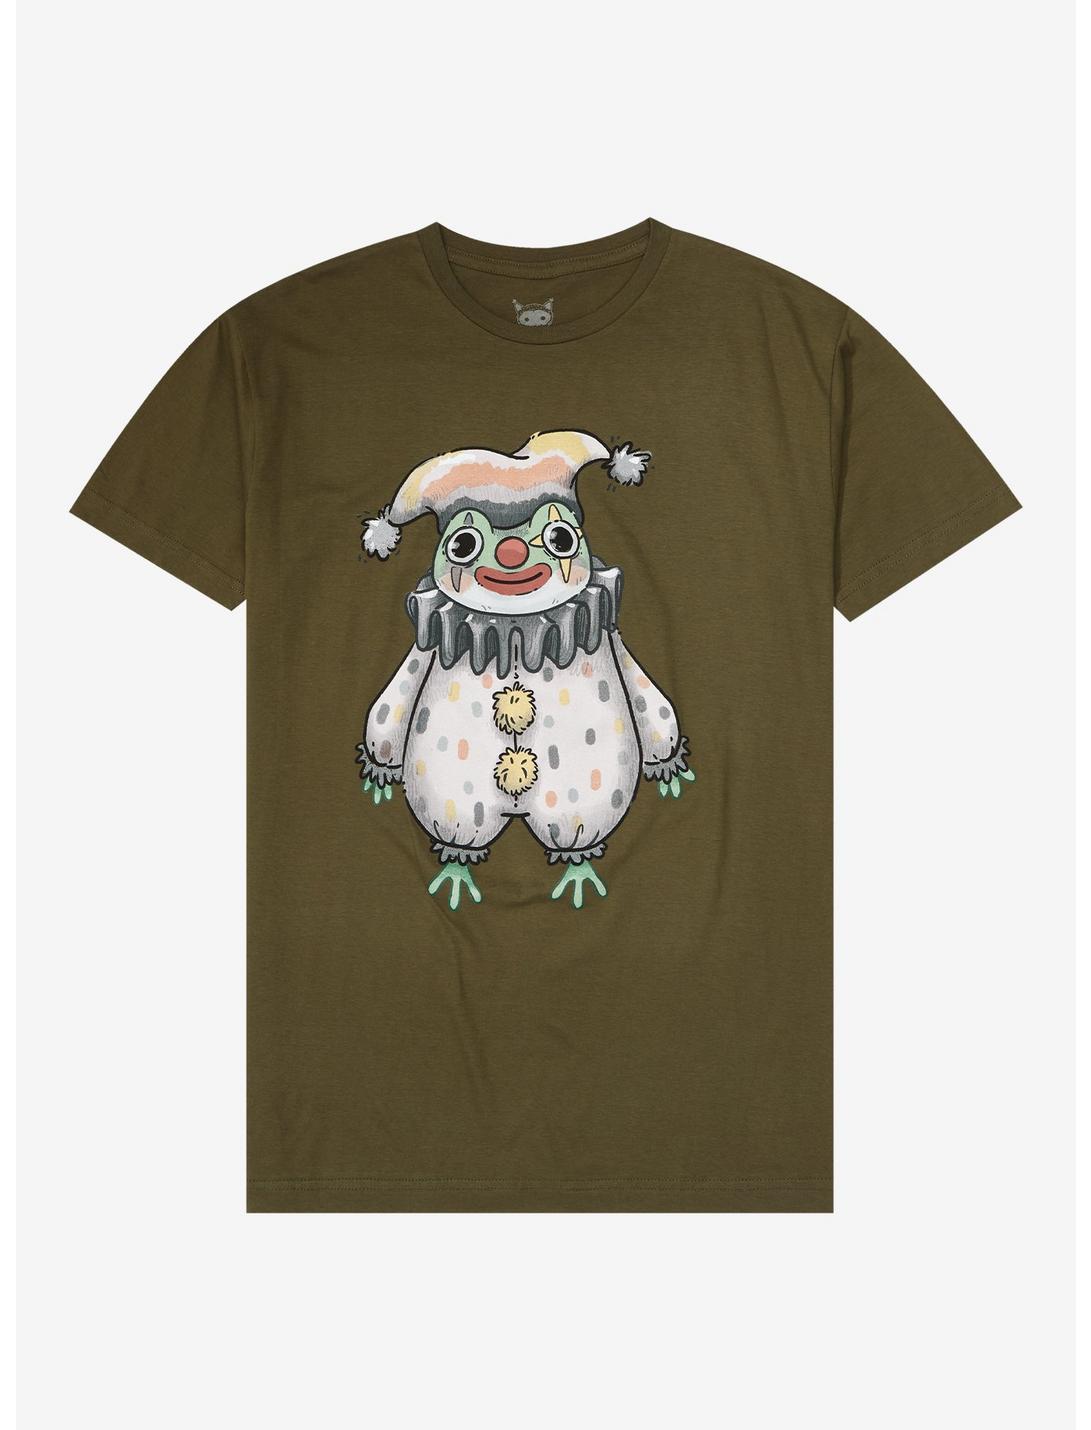 Frog Clown T-Shirt By Guild Of Calamity, MULTI, hi-res